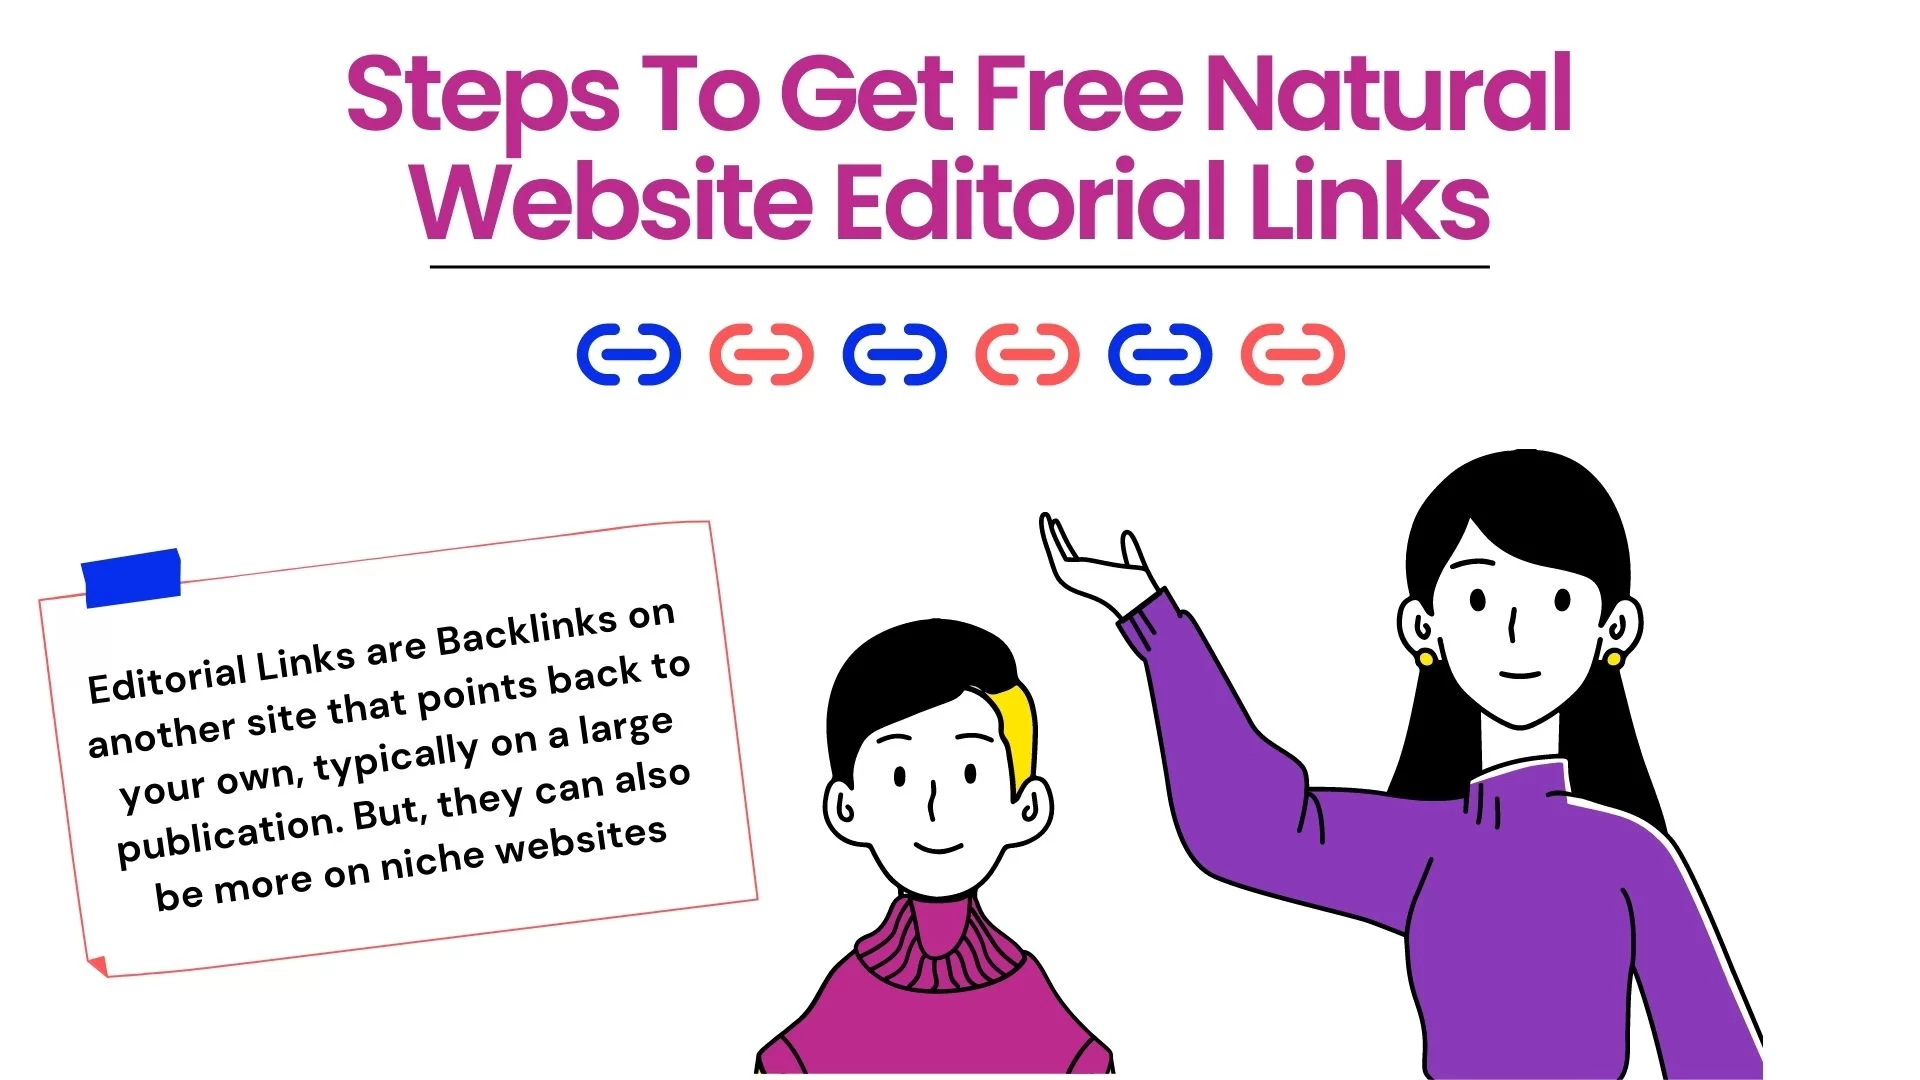 What Are Editorial Links?